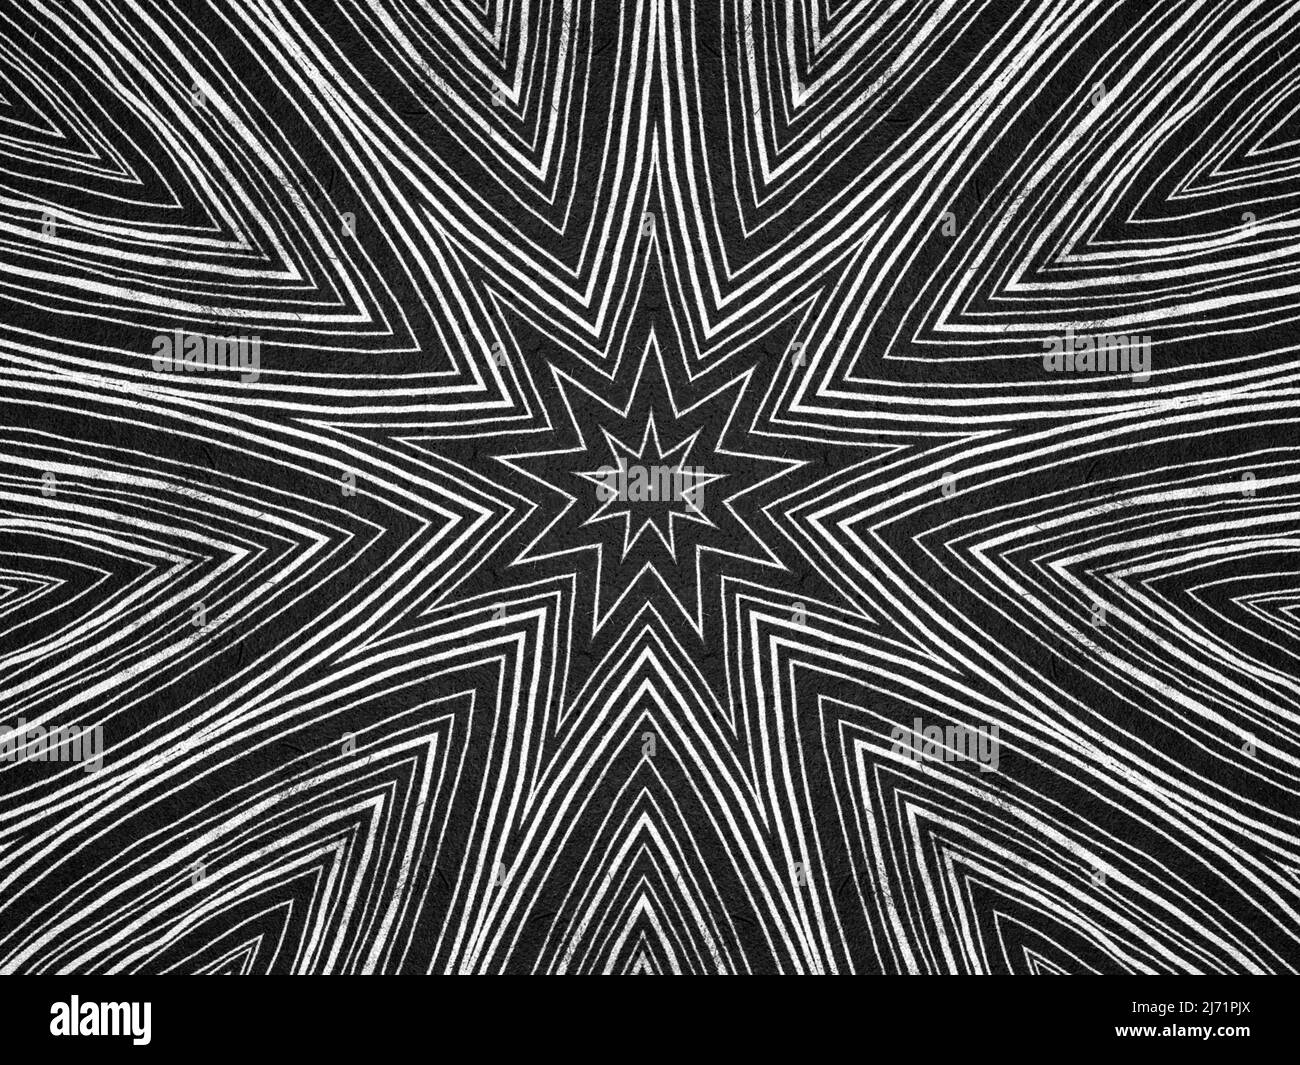 Psychedelic Black and White Stock Photos & Images - Alamy